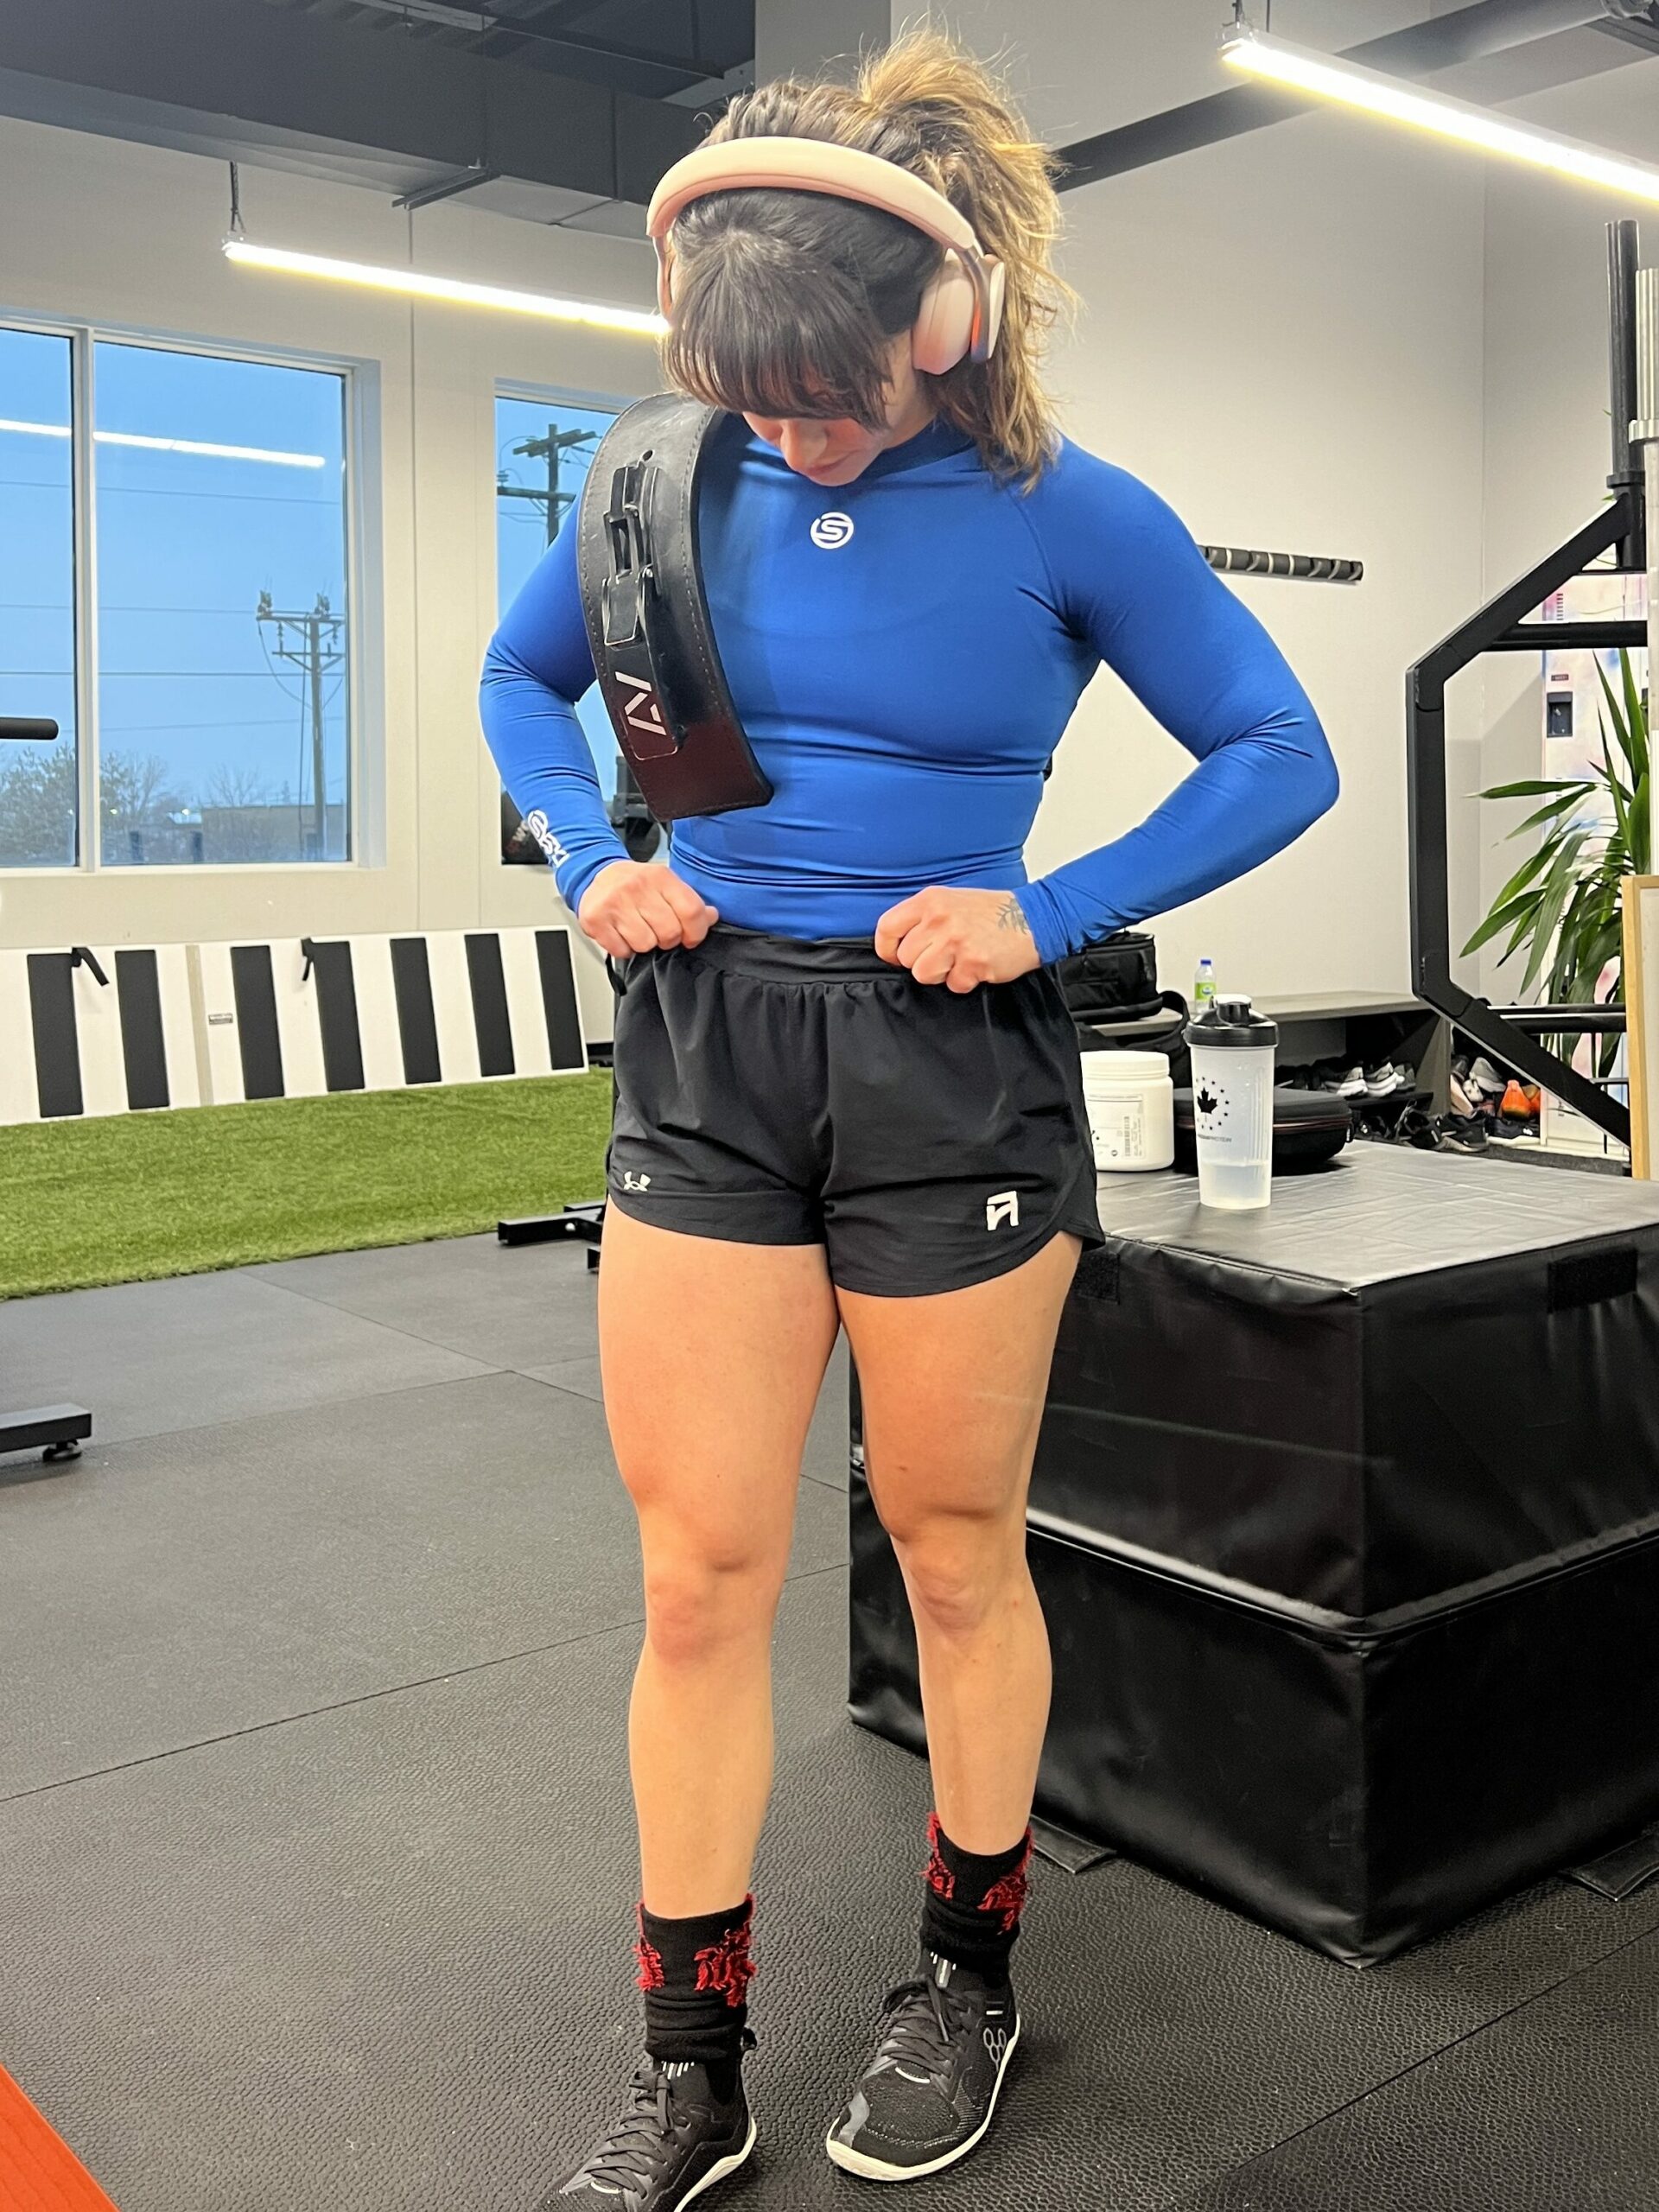 Leah Mamane models SKINS long sleeve compression top in the gym.